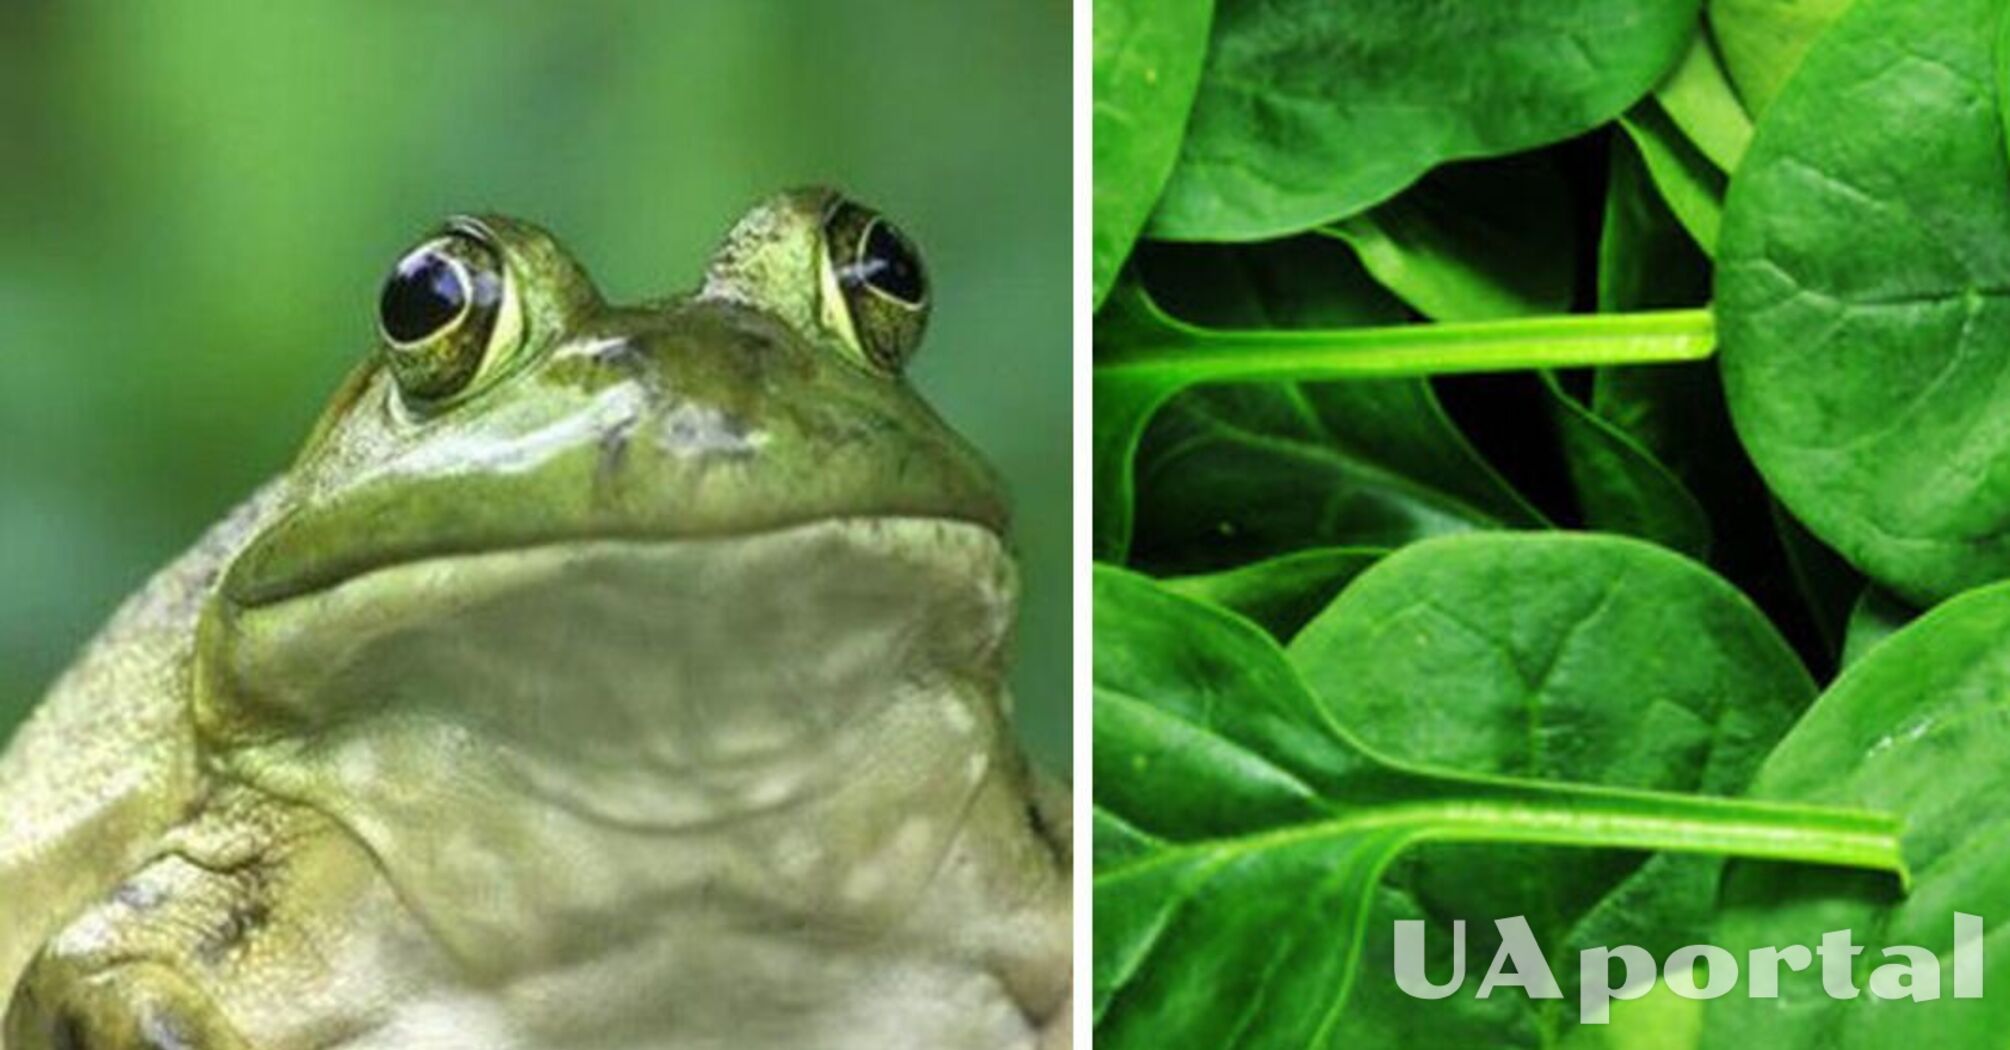 A woman found a live frog in a package of spinach (video)